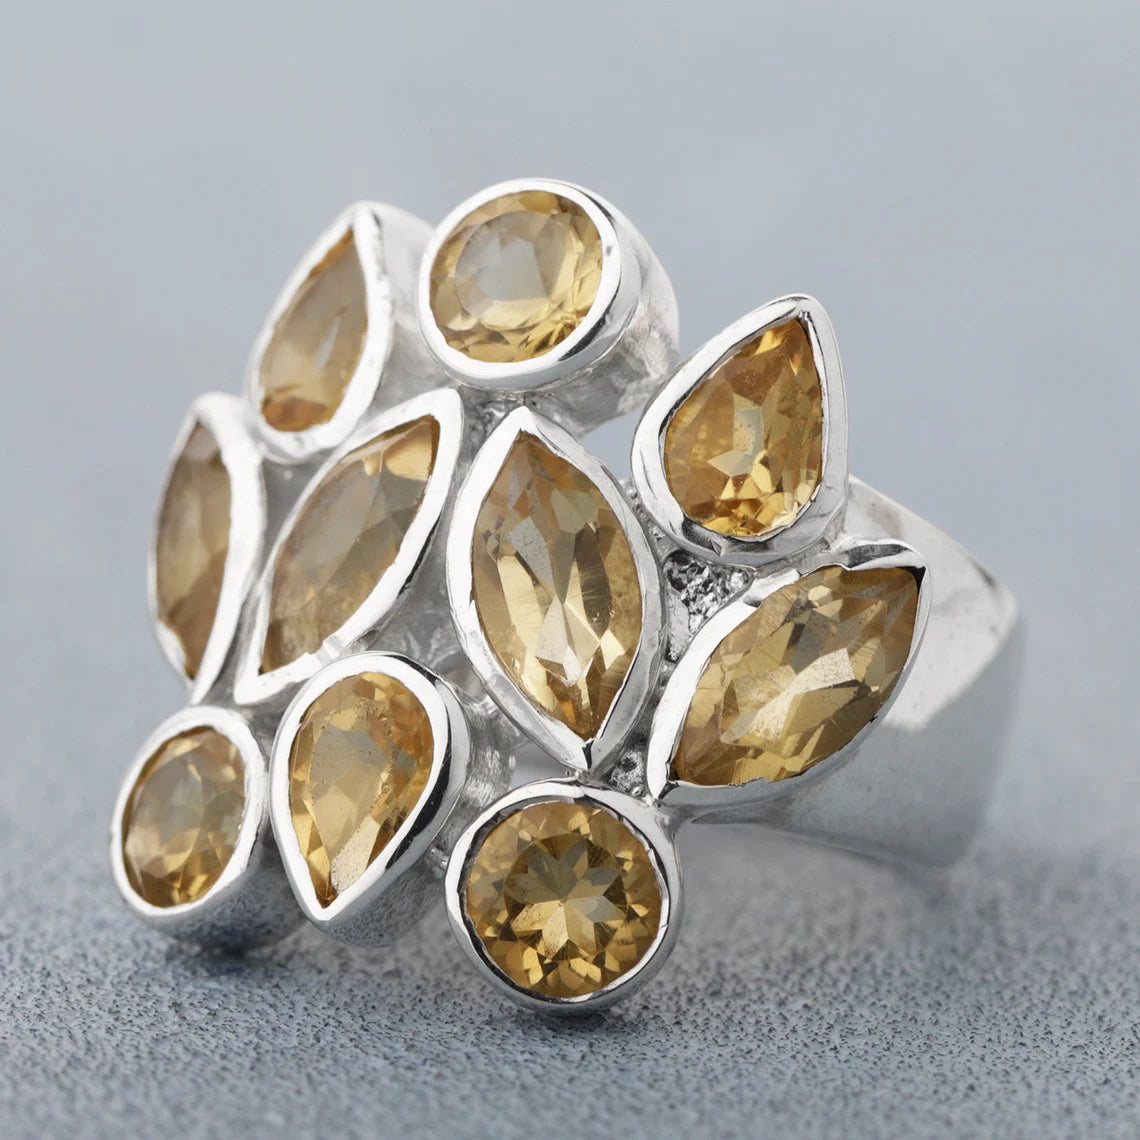 Citrine Ring - Solid 925 Sterling Silver Ring - Handmade Multi Stone Ring - Faceted Stone Ring